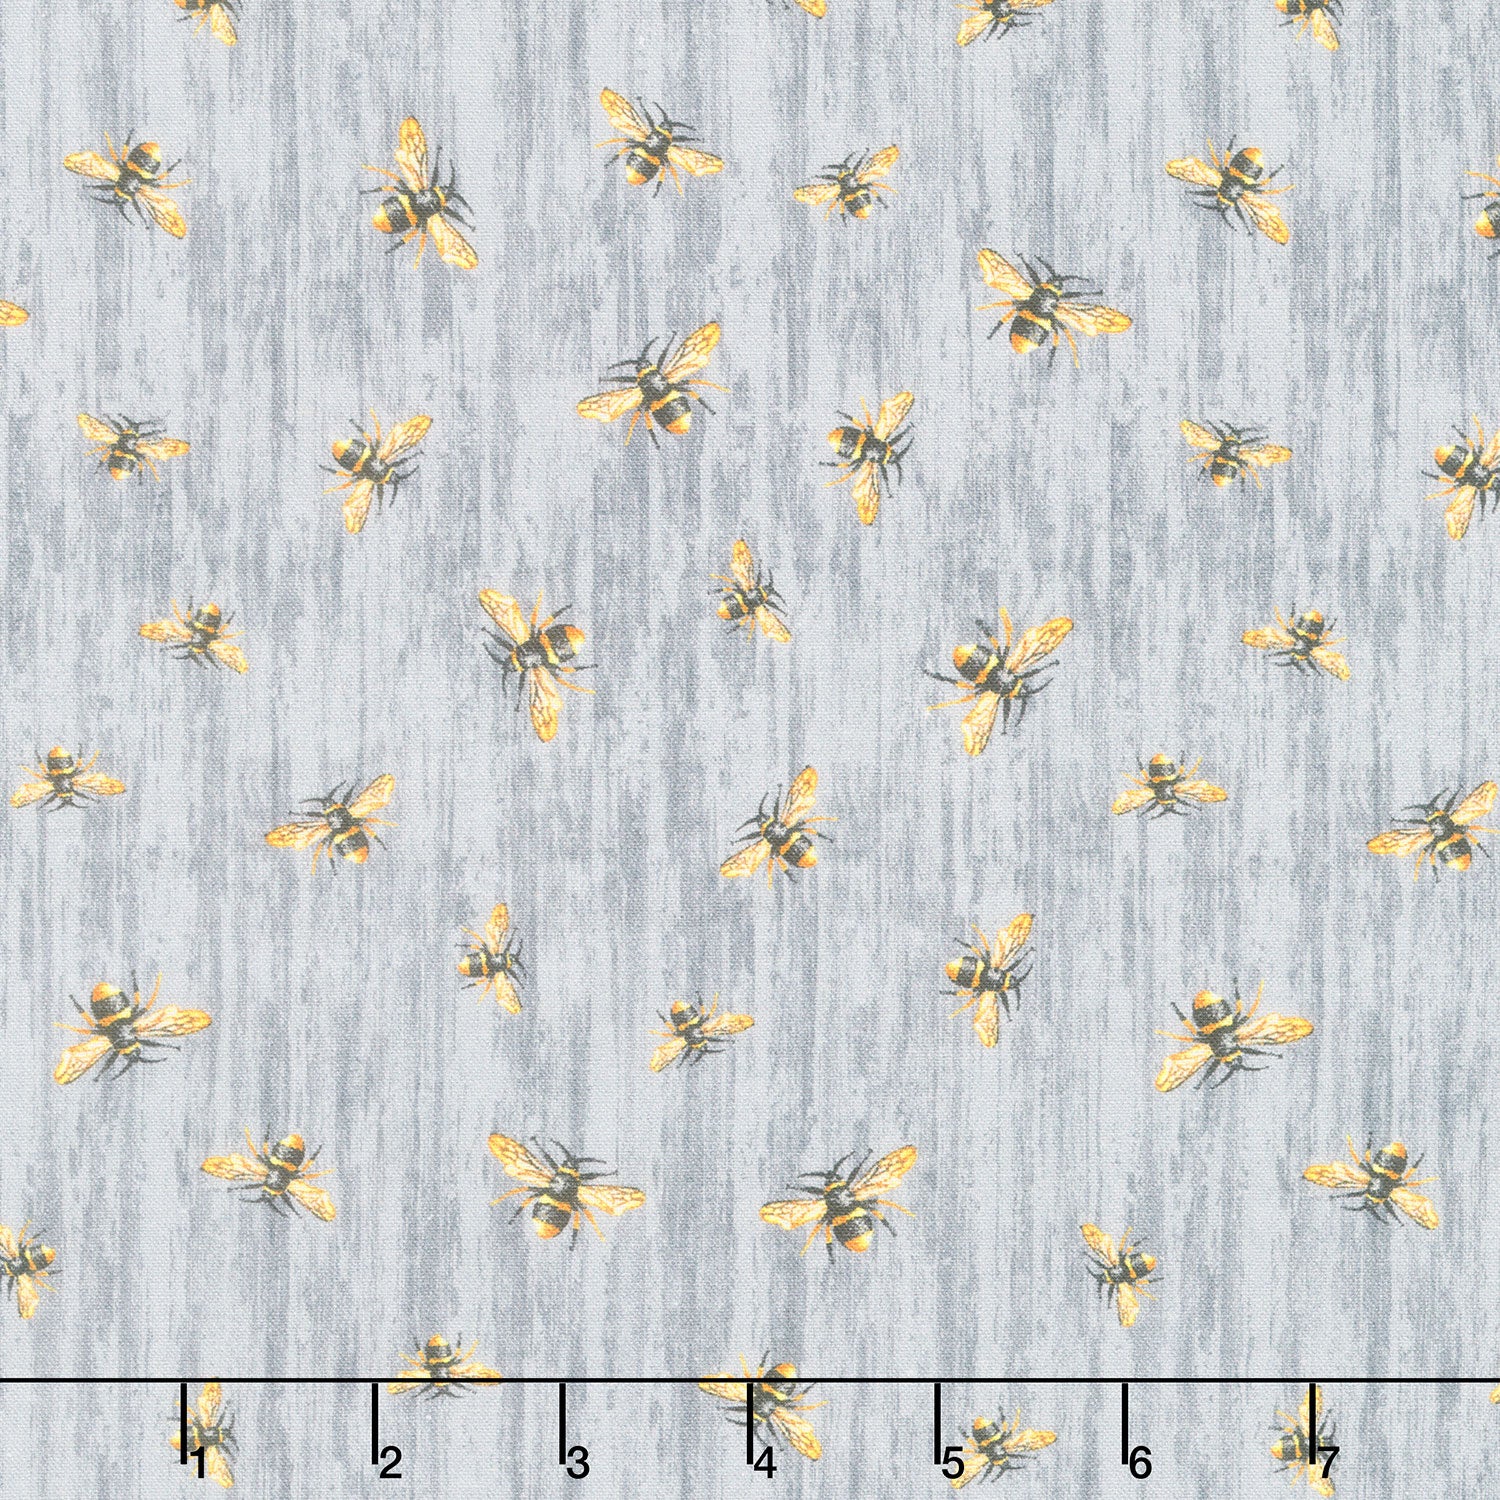 Timeless Treasures Home Is Where My Honey Is Cute Flying Bee Fabric